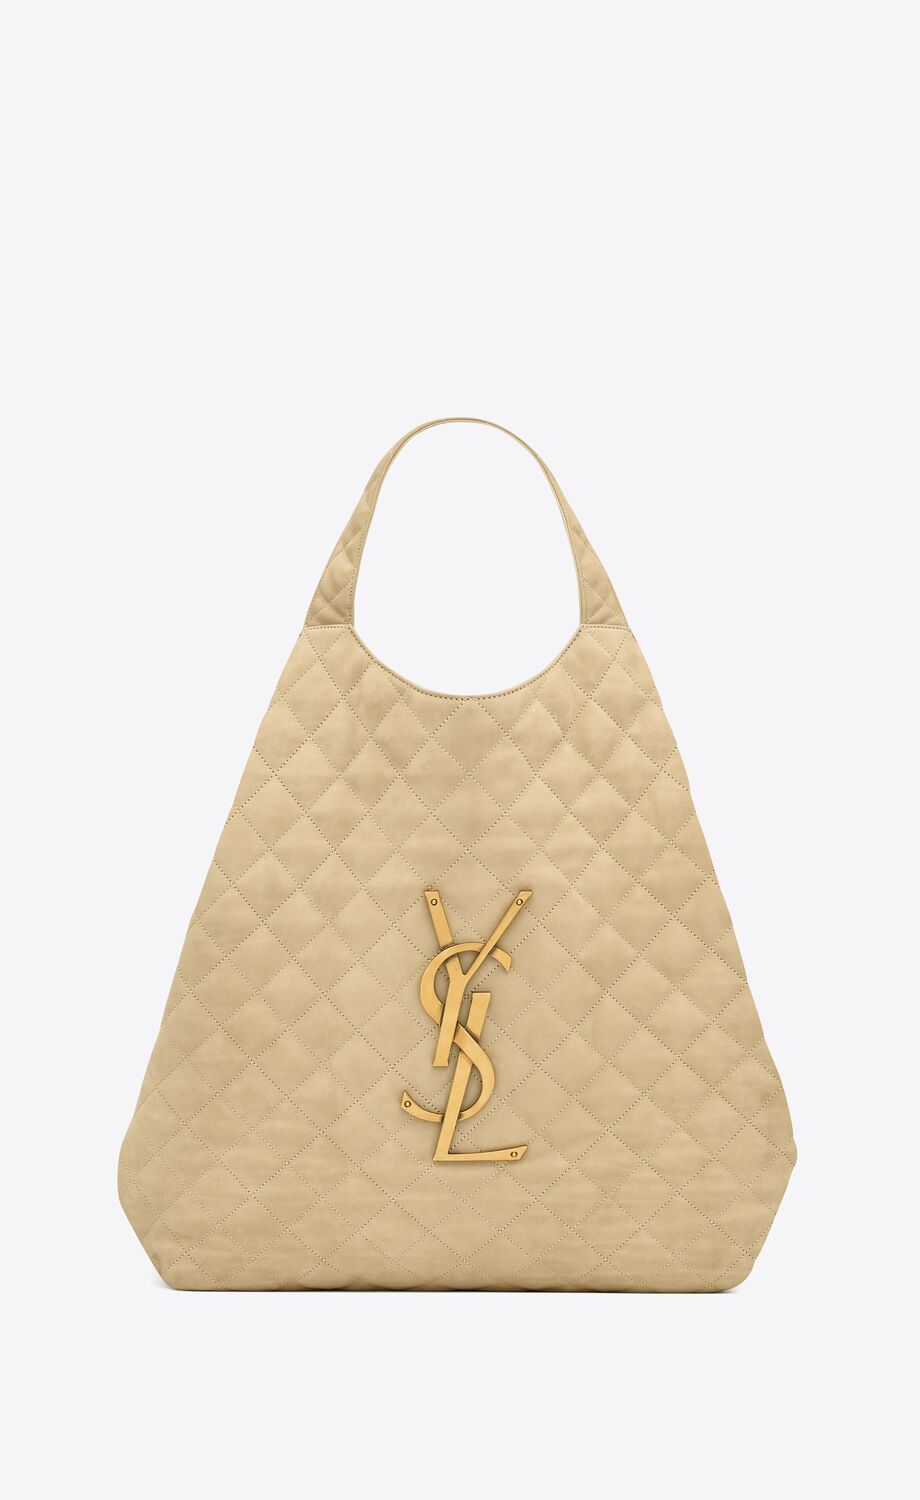 ICARE maxi shopping bag in quilted nubuck suede | Saint Laurent | YSL.com